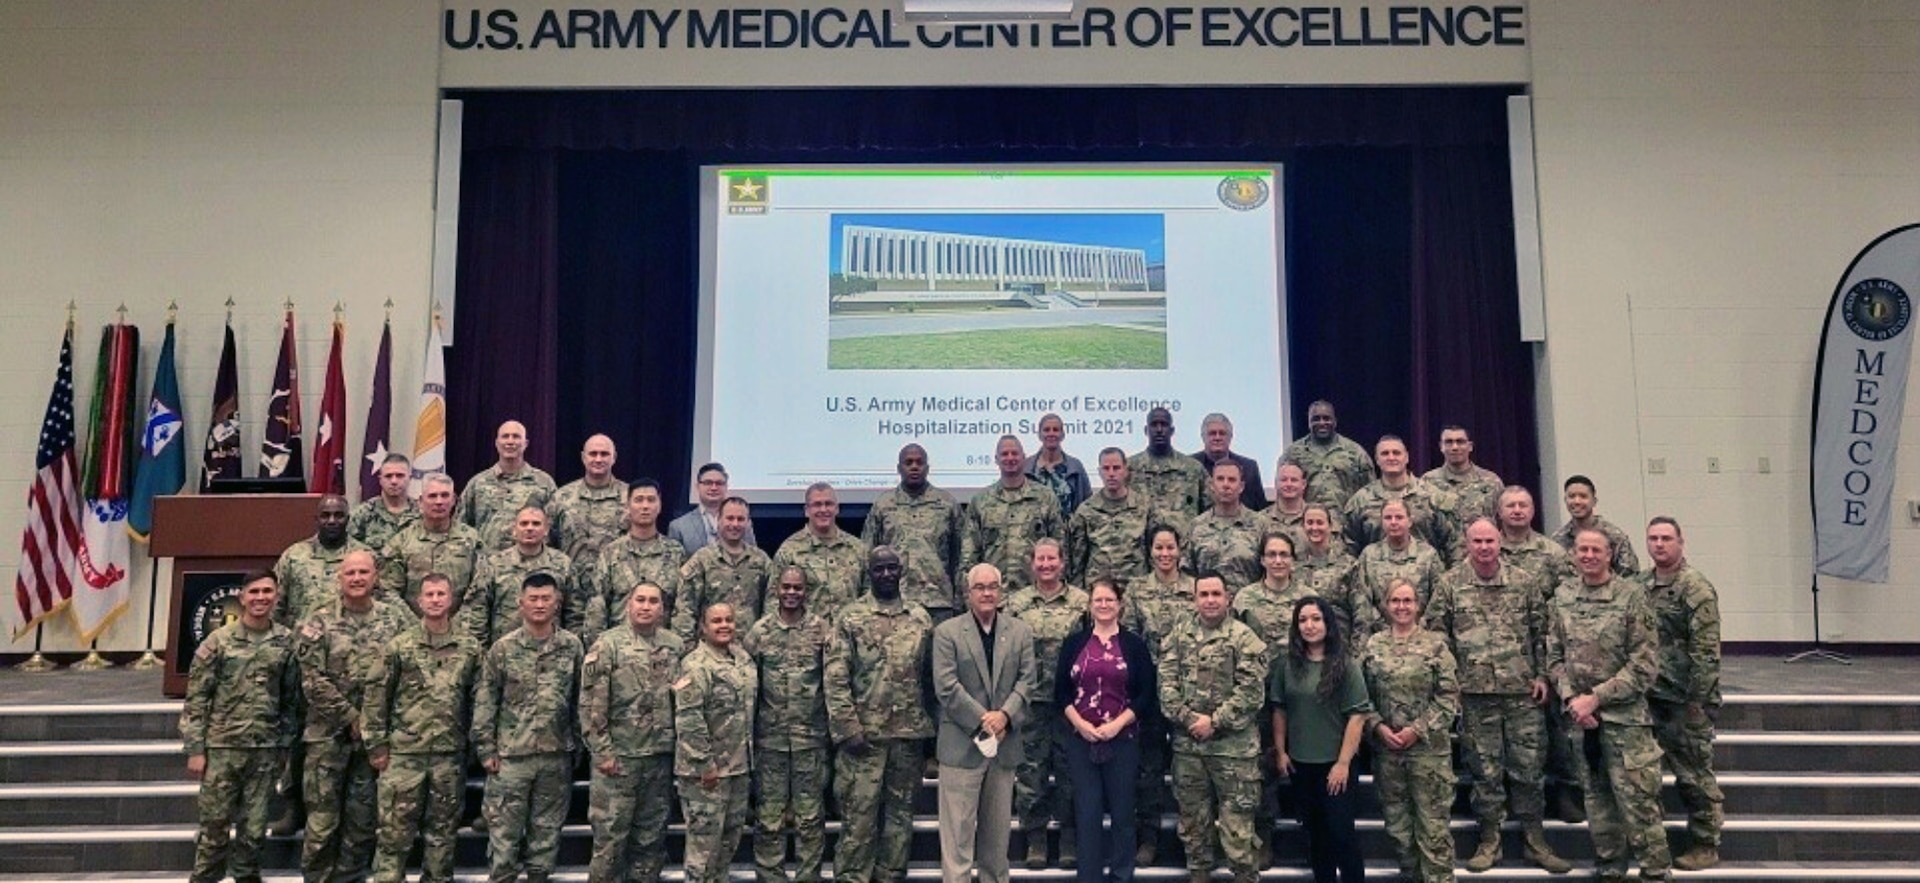 Fully-vaccinated in-person attendees, who wore masks during the three-day hospitalization summit as an extra COVID-19 precaution, pose for a quick “mask-off” group photo with J.M. Harmon III (center), deputy to the commanding general, U.S. Army Medical Center of Excellence, on Sept. 10 in Blesse Auditorium at Joint Base San Antonio-Fort Sam Houston.